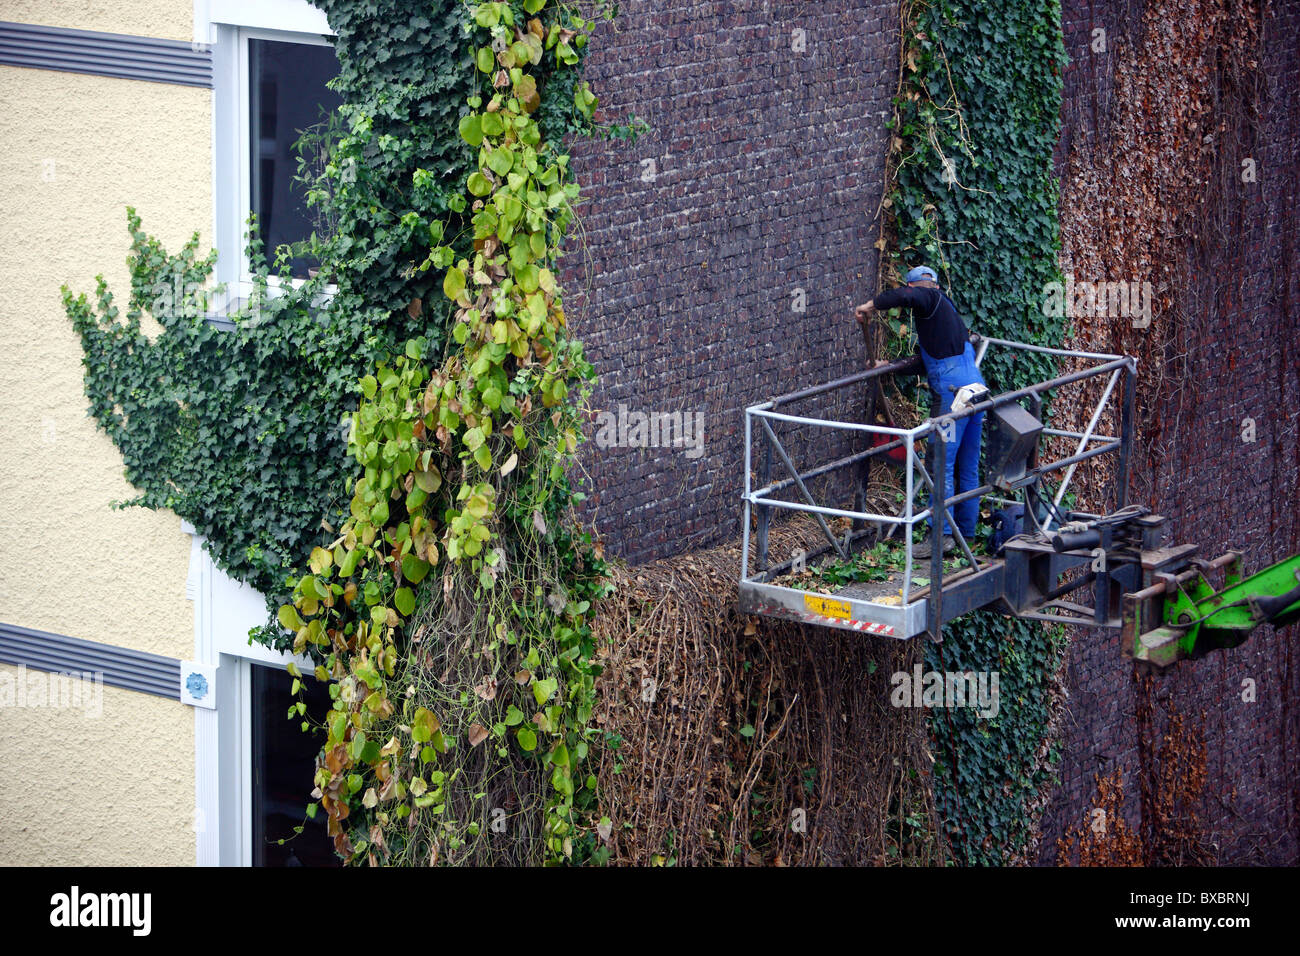 Ivy-clad wall of a house is cleaned. The ivy will by complete removed from the brick wall. Stock Photo